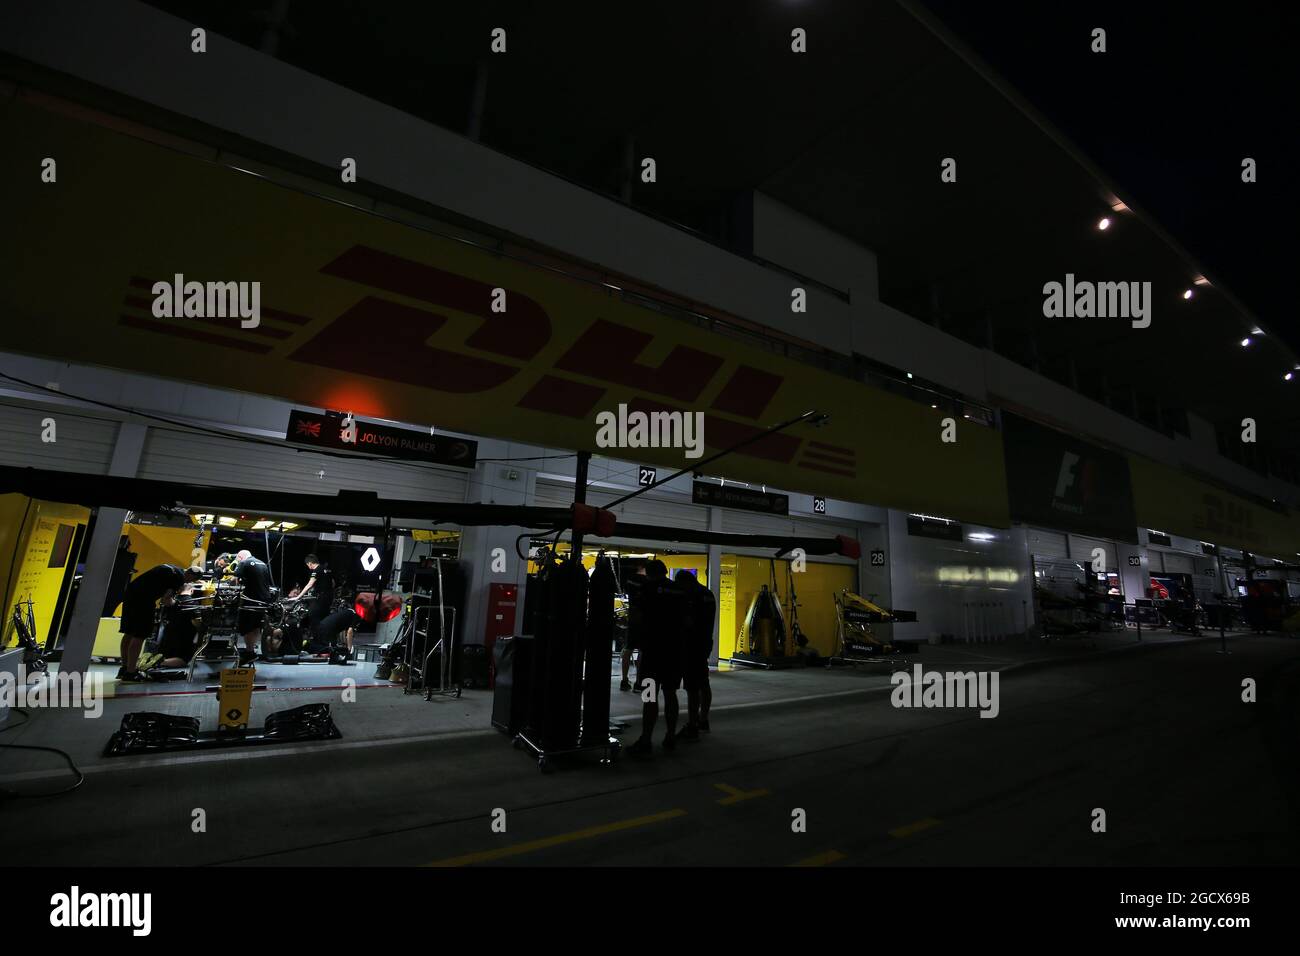 The Renault Sport F1 Team pit garages at night. Japanese Grand Prix, Friday 7th October 2016. Suzuka, Japan. Stock Photo